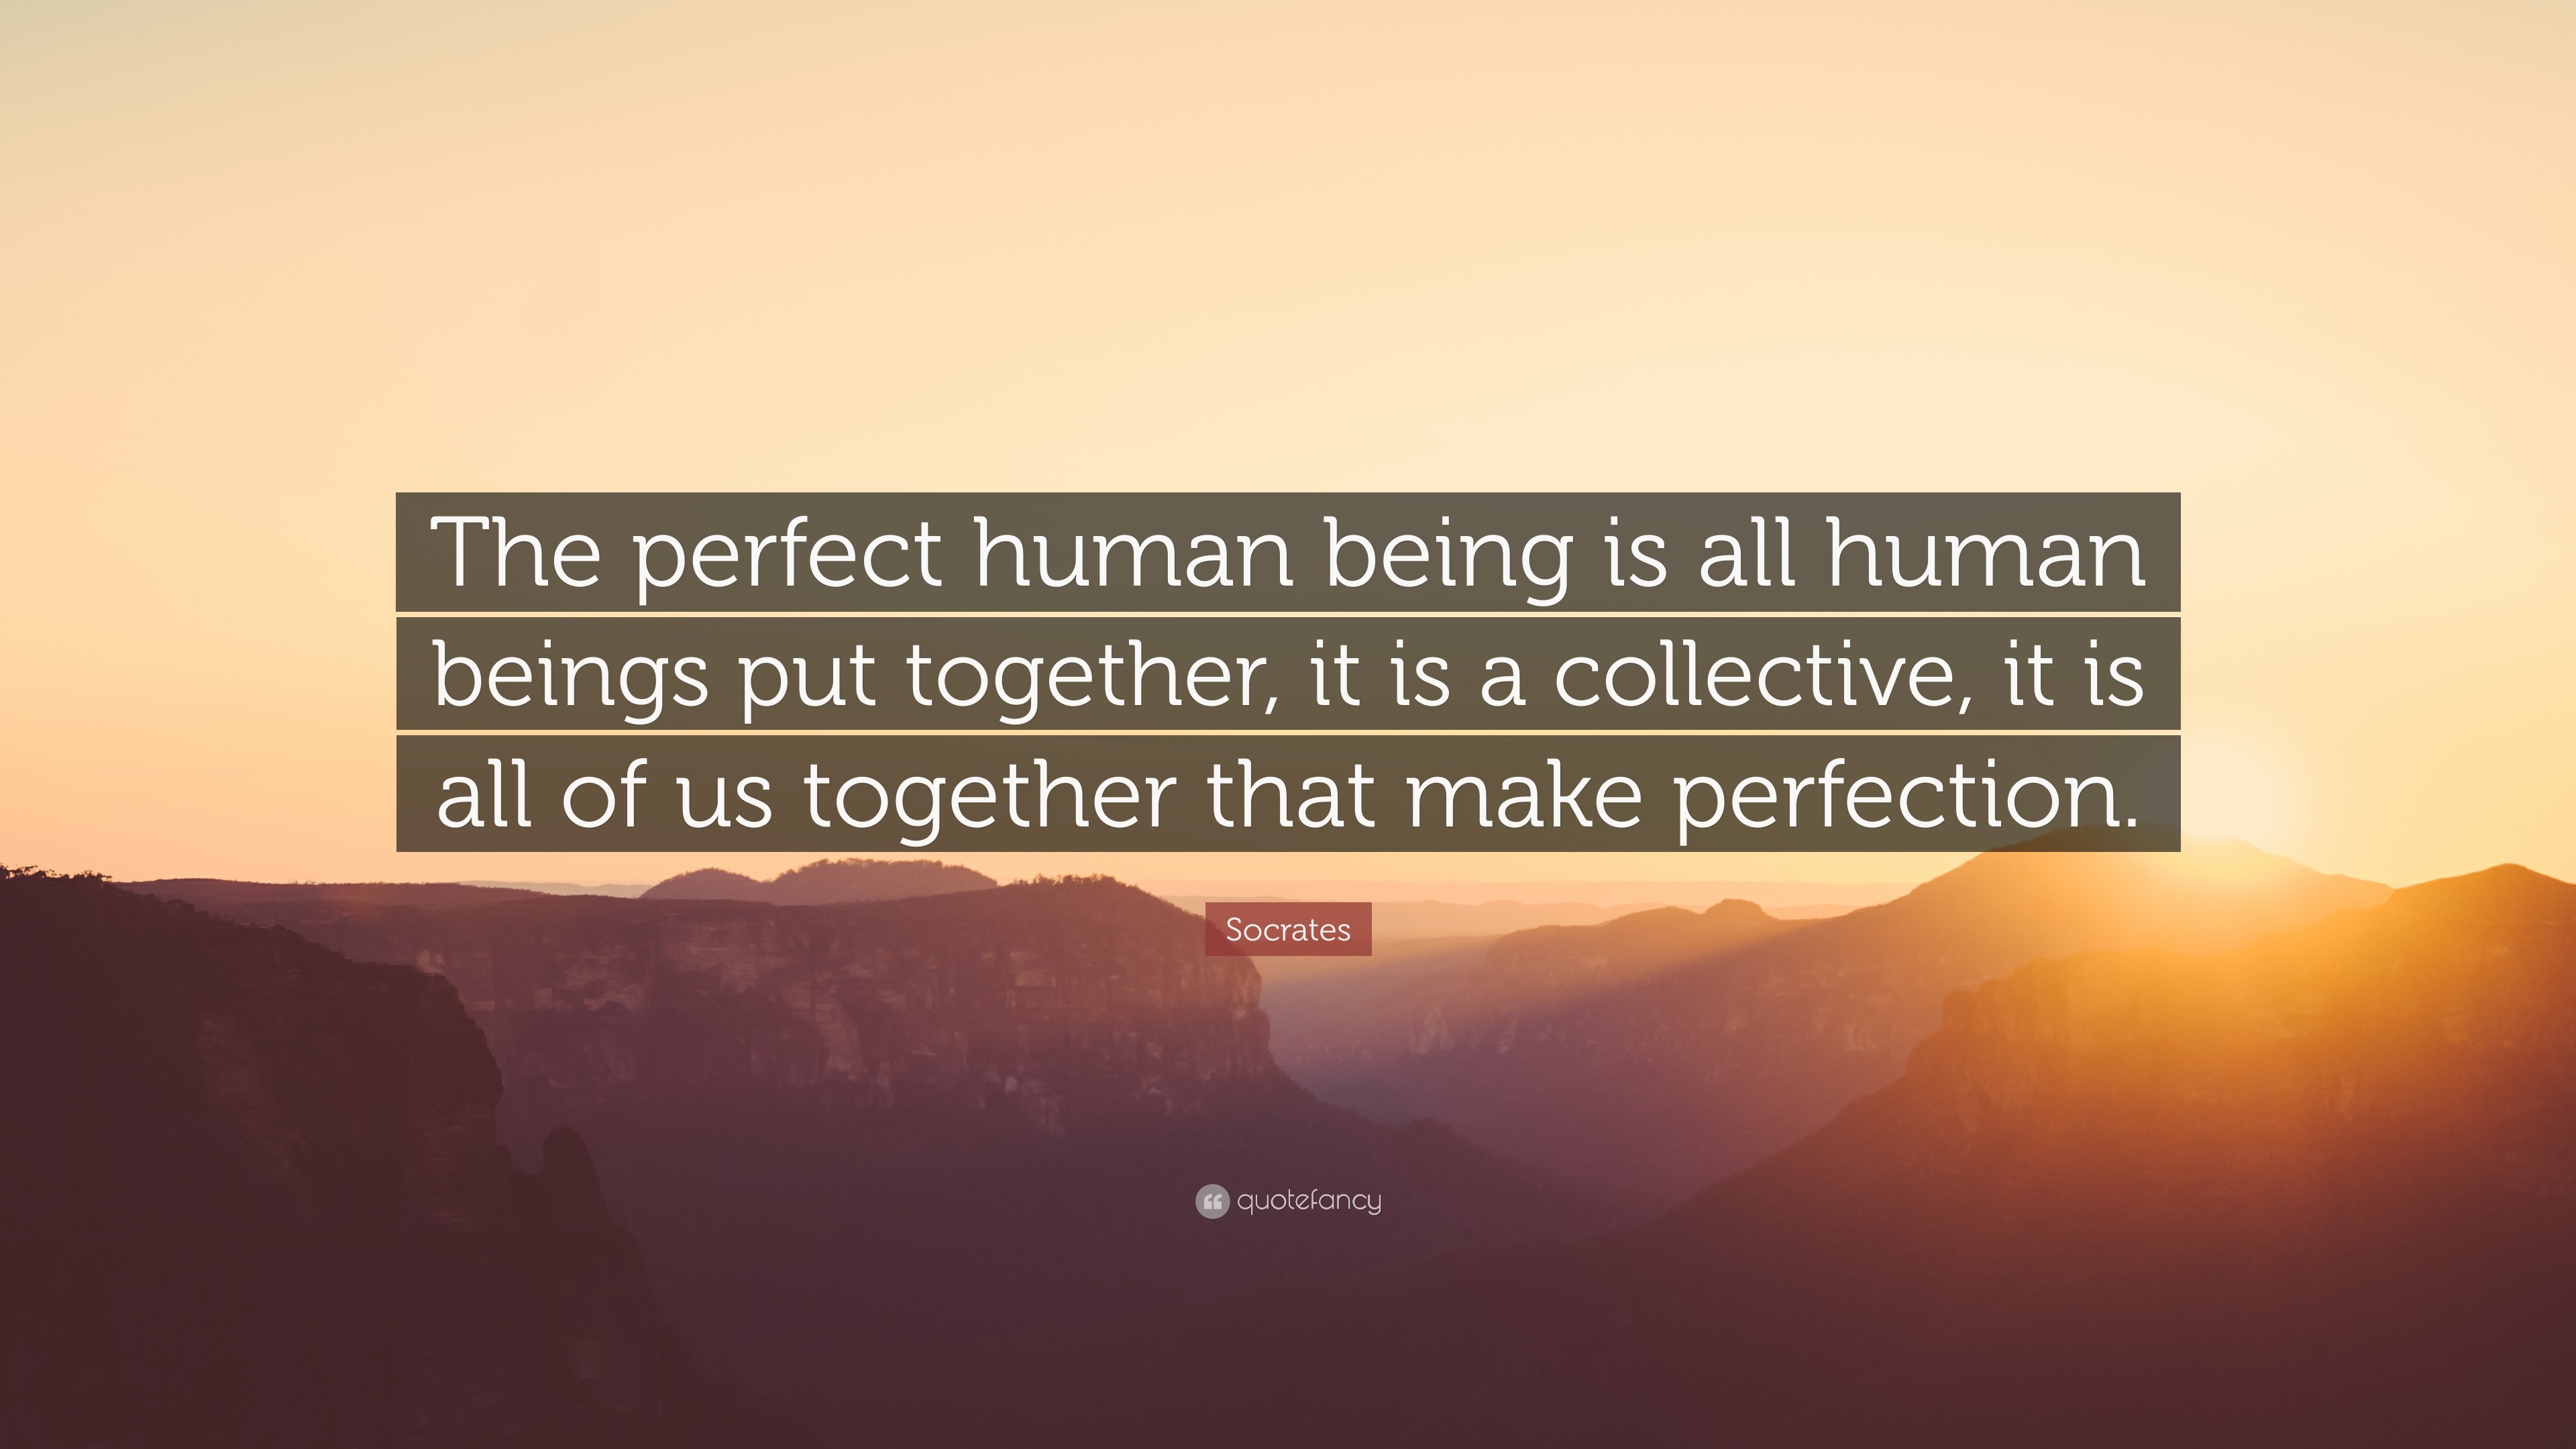 Socrates Quote The Perfect Human Being Is All Human Beings Put Together It Is A Collective It Is All Of Us Together That Make Perfect 9 Wallpapers Quotefancy